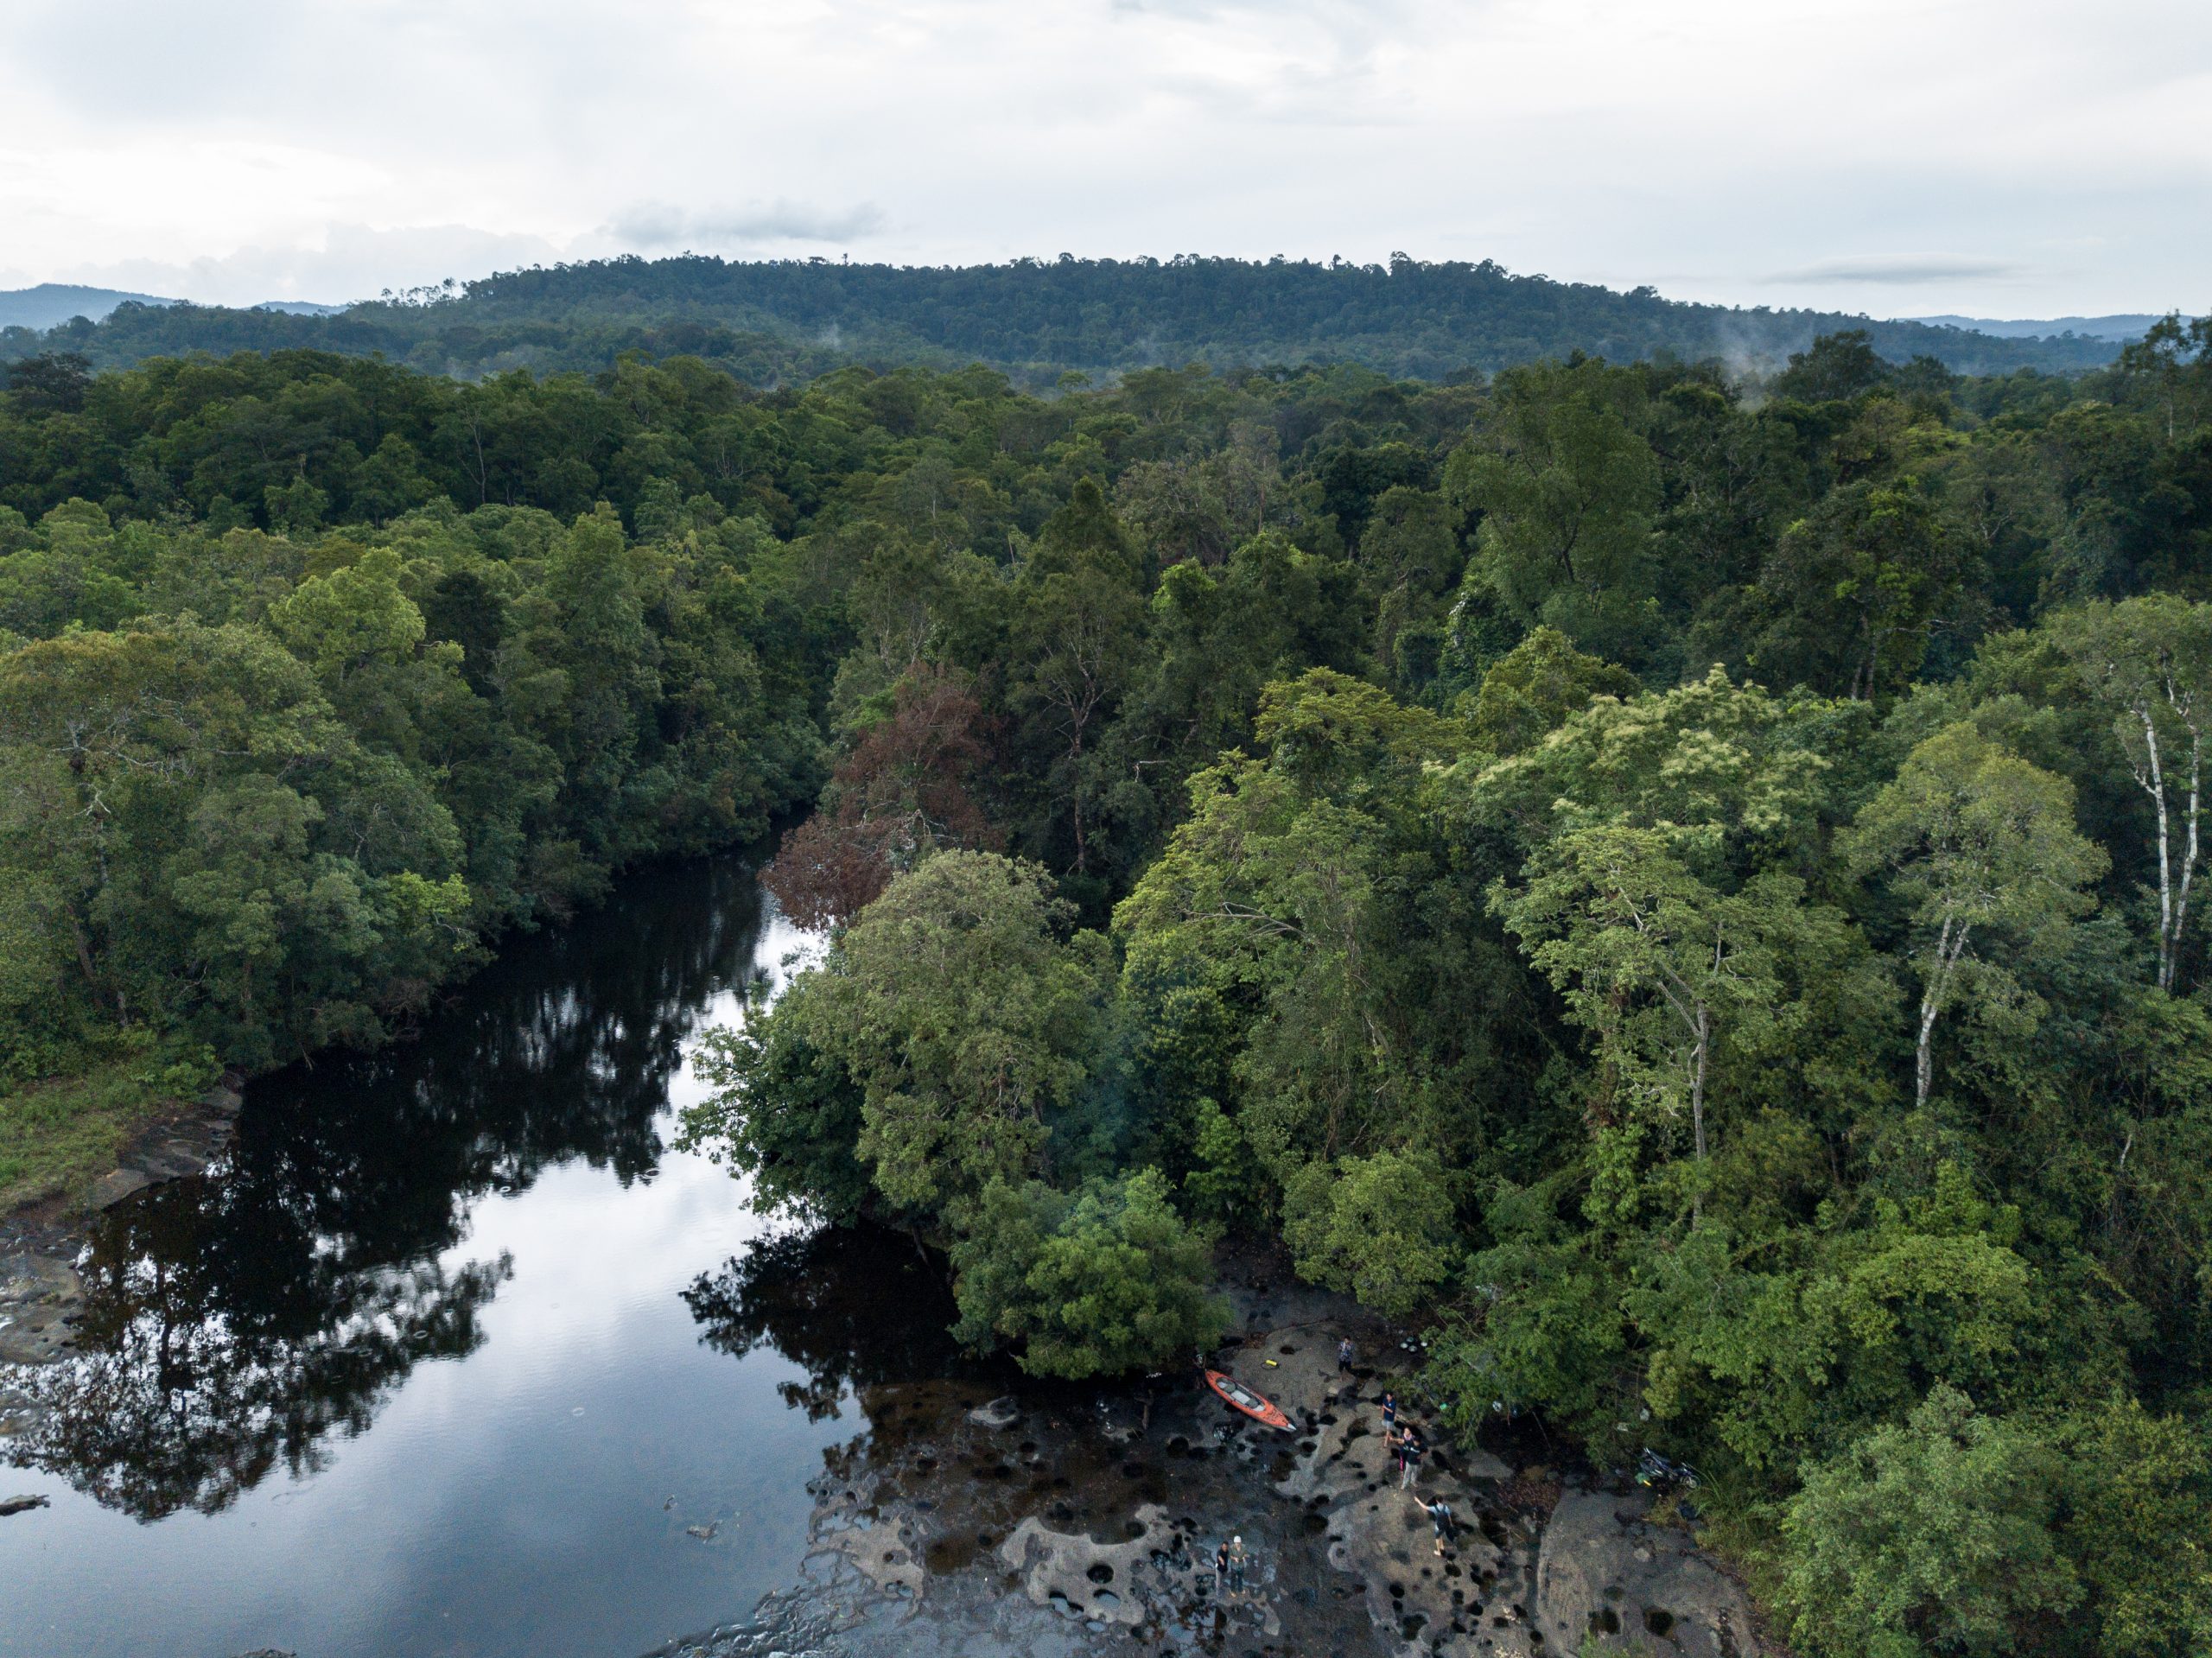 Aerial image of a river disappearing into lush forest. A kayak rests on the shore at the bottom of the image.